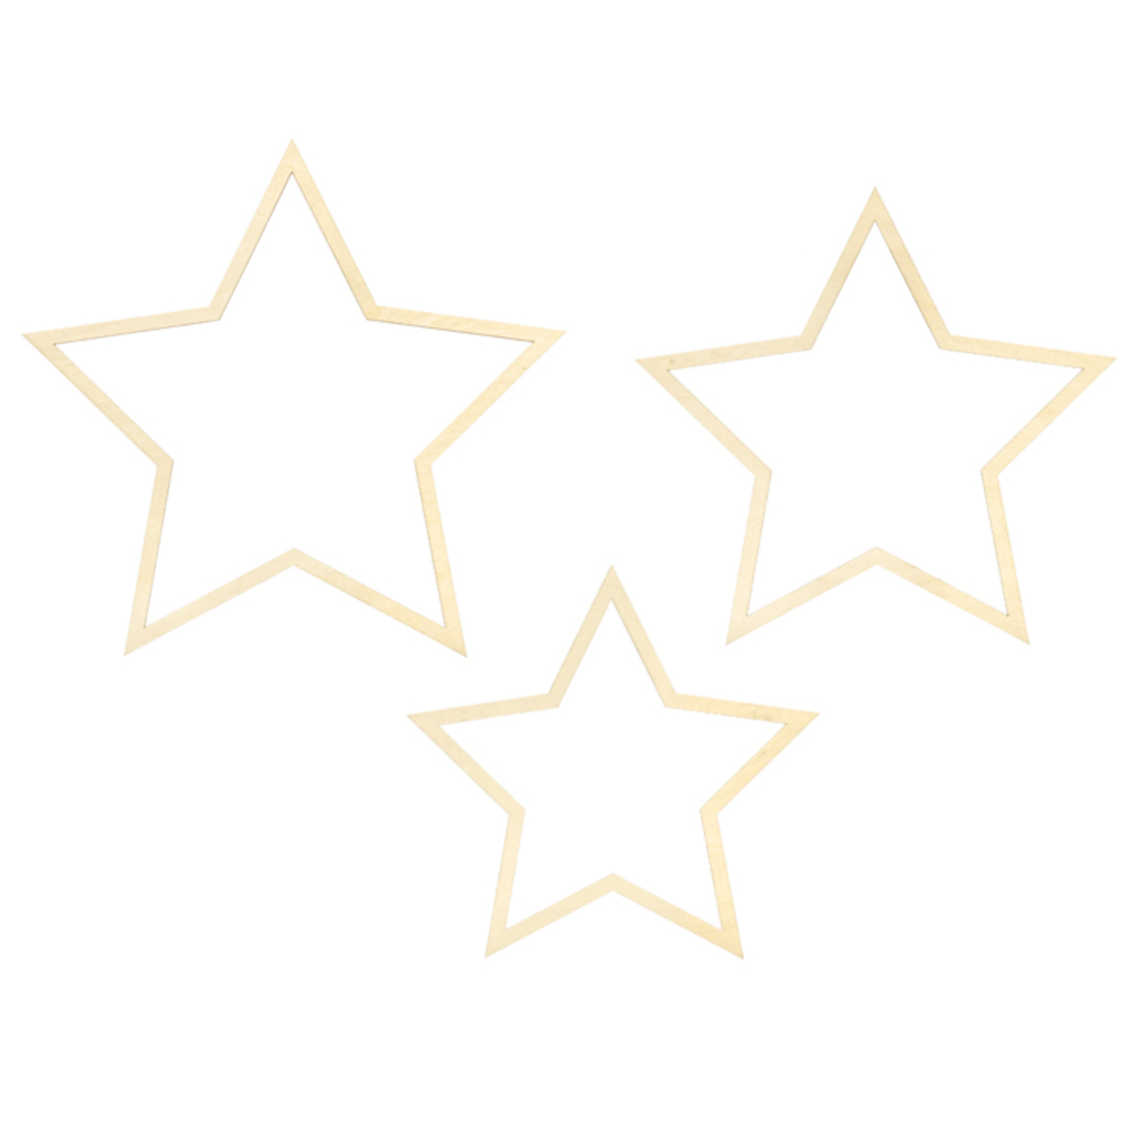 Wooden Star Decorations | Scandi Style Christmas | Unique Christmas Party Deco